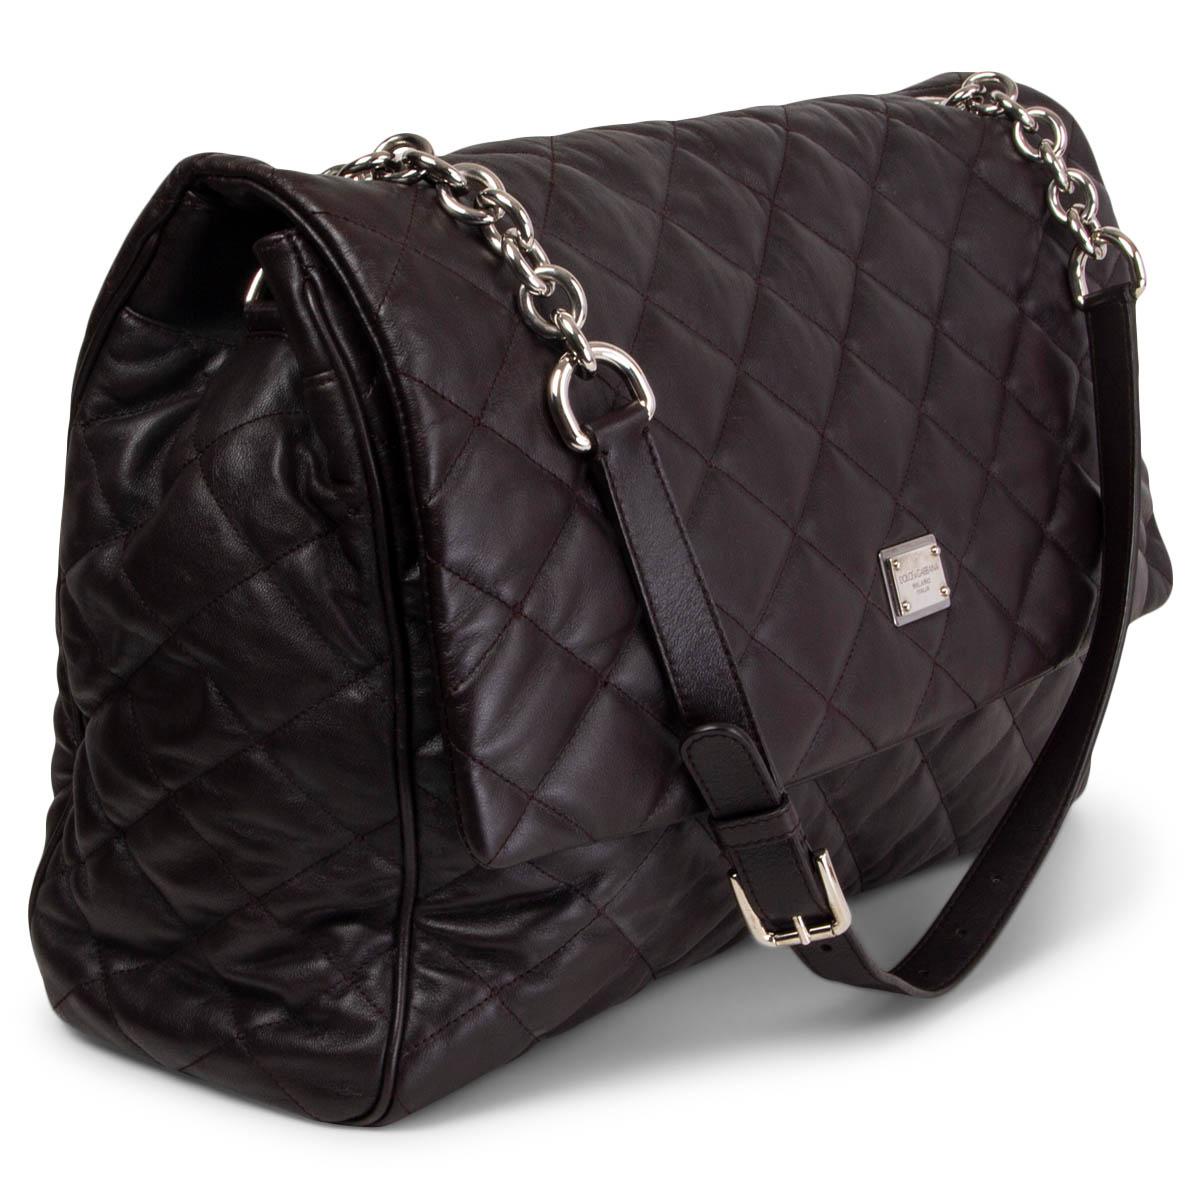 100% authentic Dolce & Gabbana Miss Kate quilted shoulder flap bag in espresso brown soft lambskin. Opens with two magnetic buttons under the flap to a beige and brown leopard print lining with one zipper pocket against the back, two open pockets